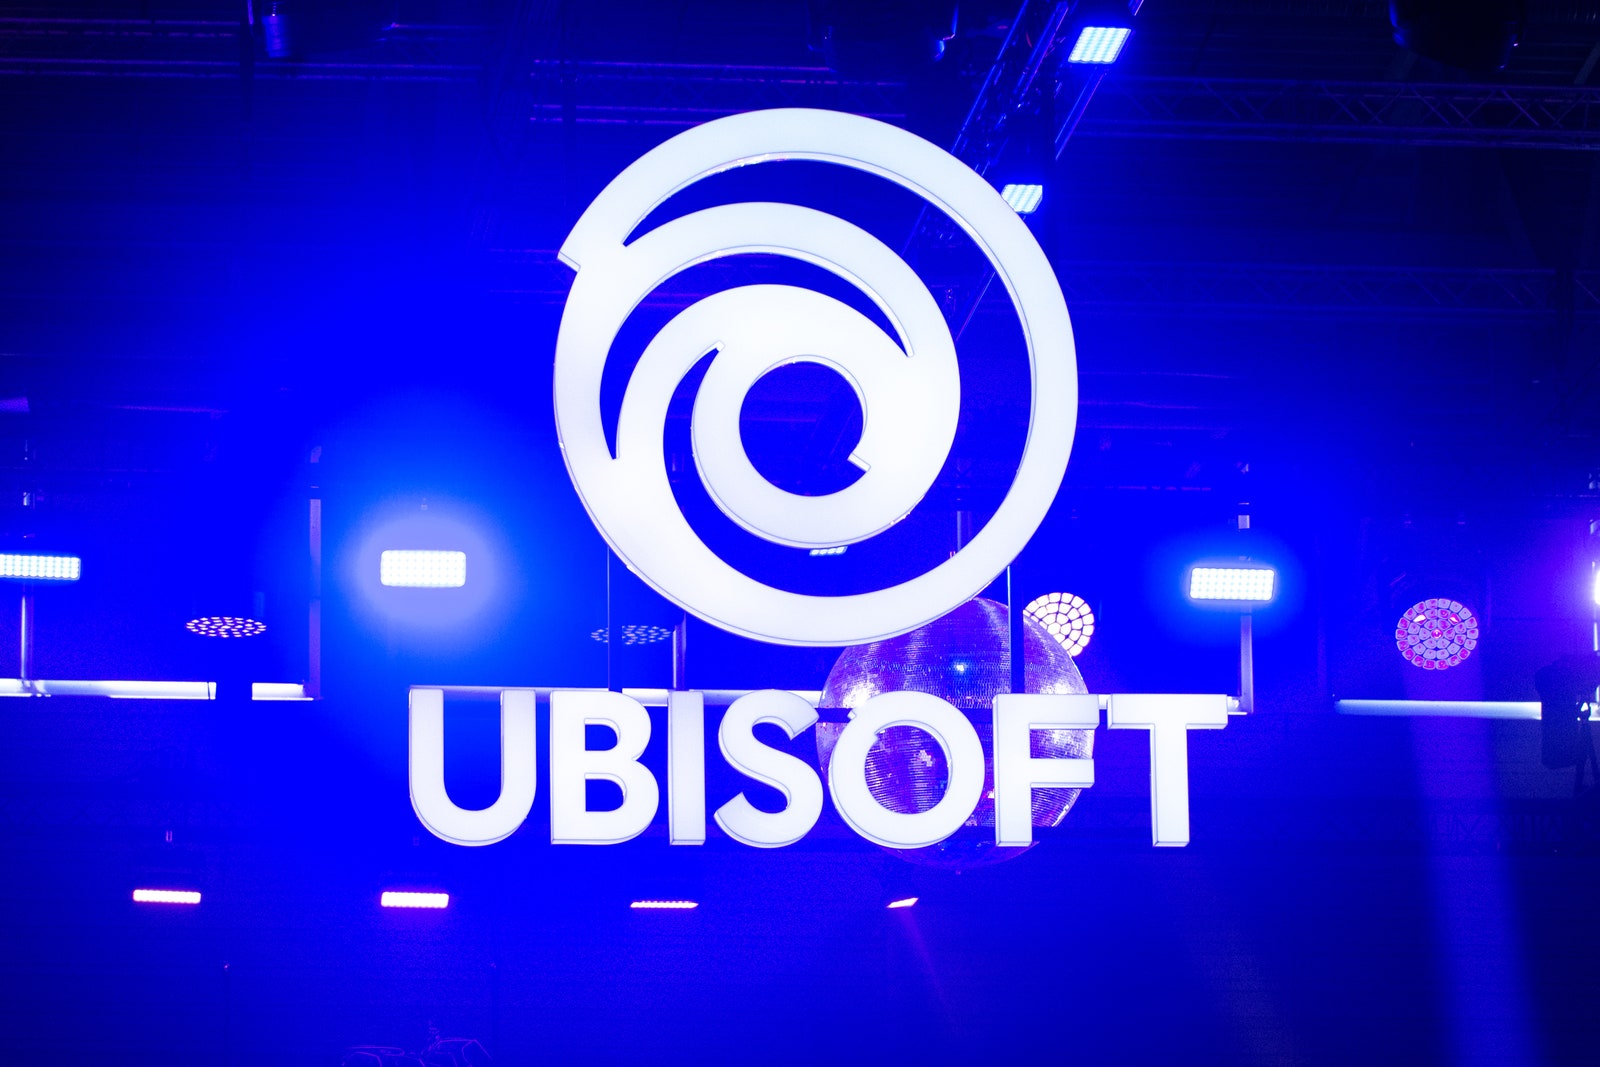 Former Ubisoft Execs Detained as Part of Harassment Investigation